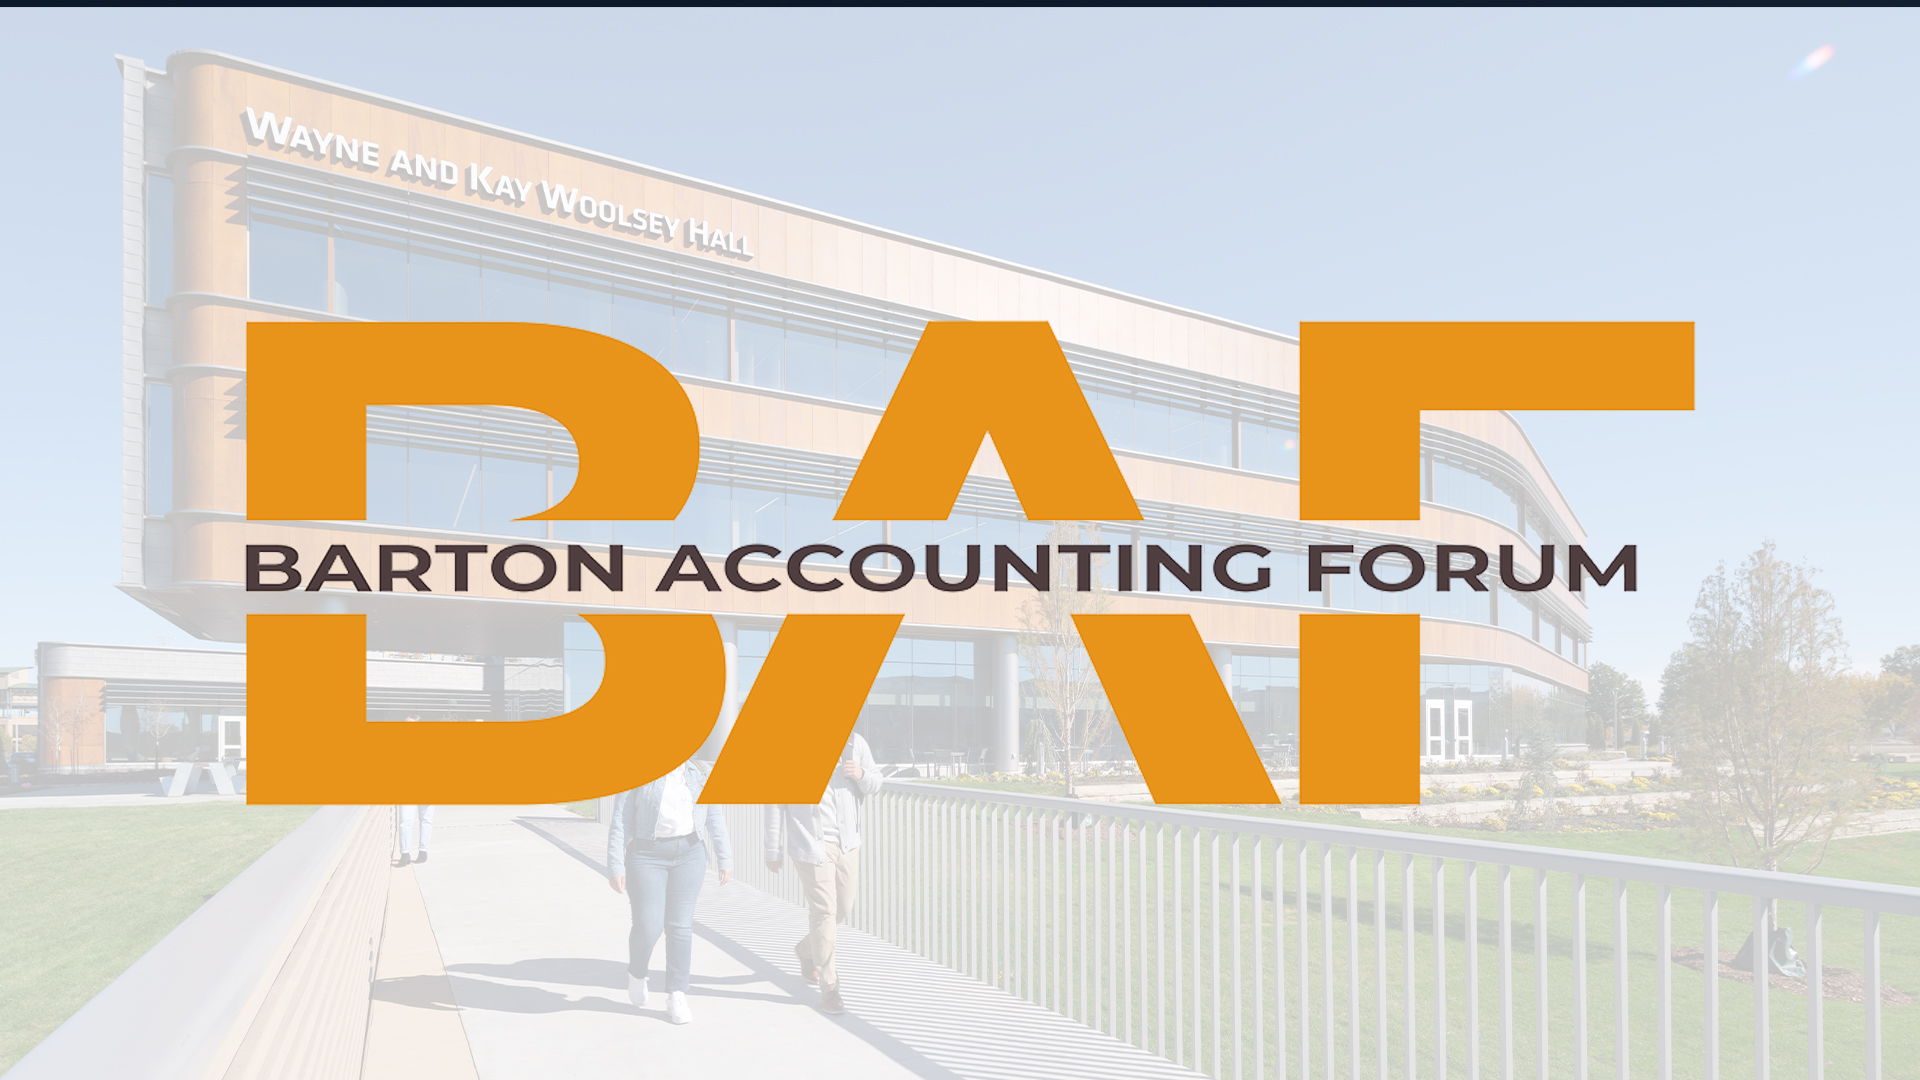 Barton Accounting Forum logo in front of photo of Woolsey Hall.